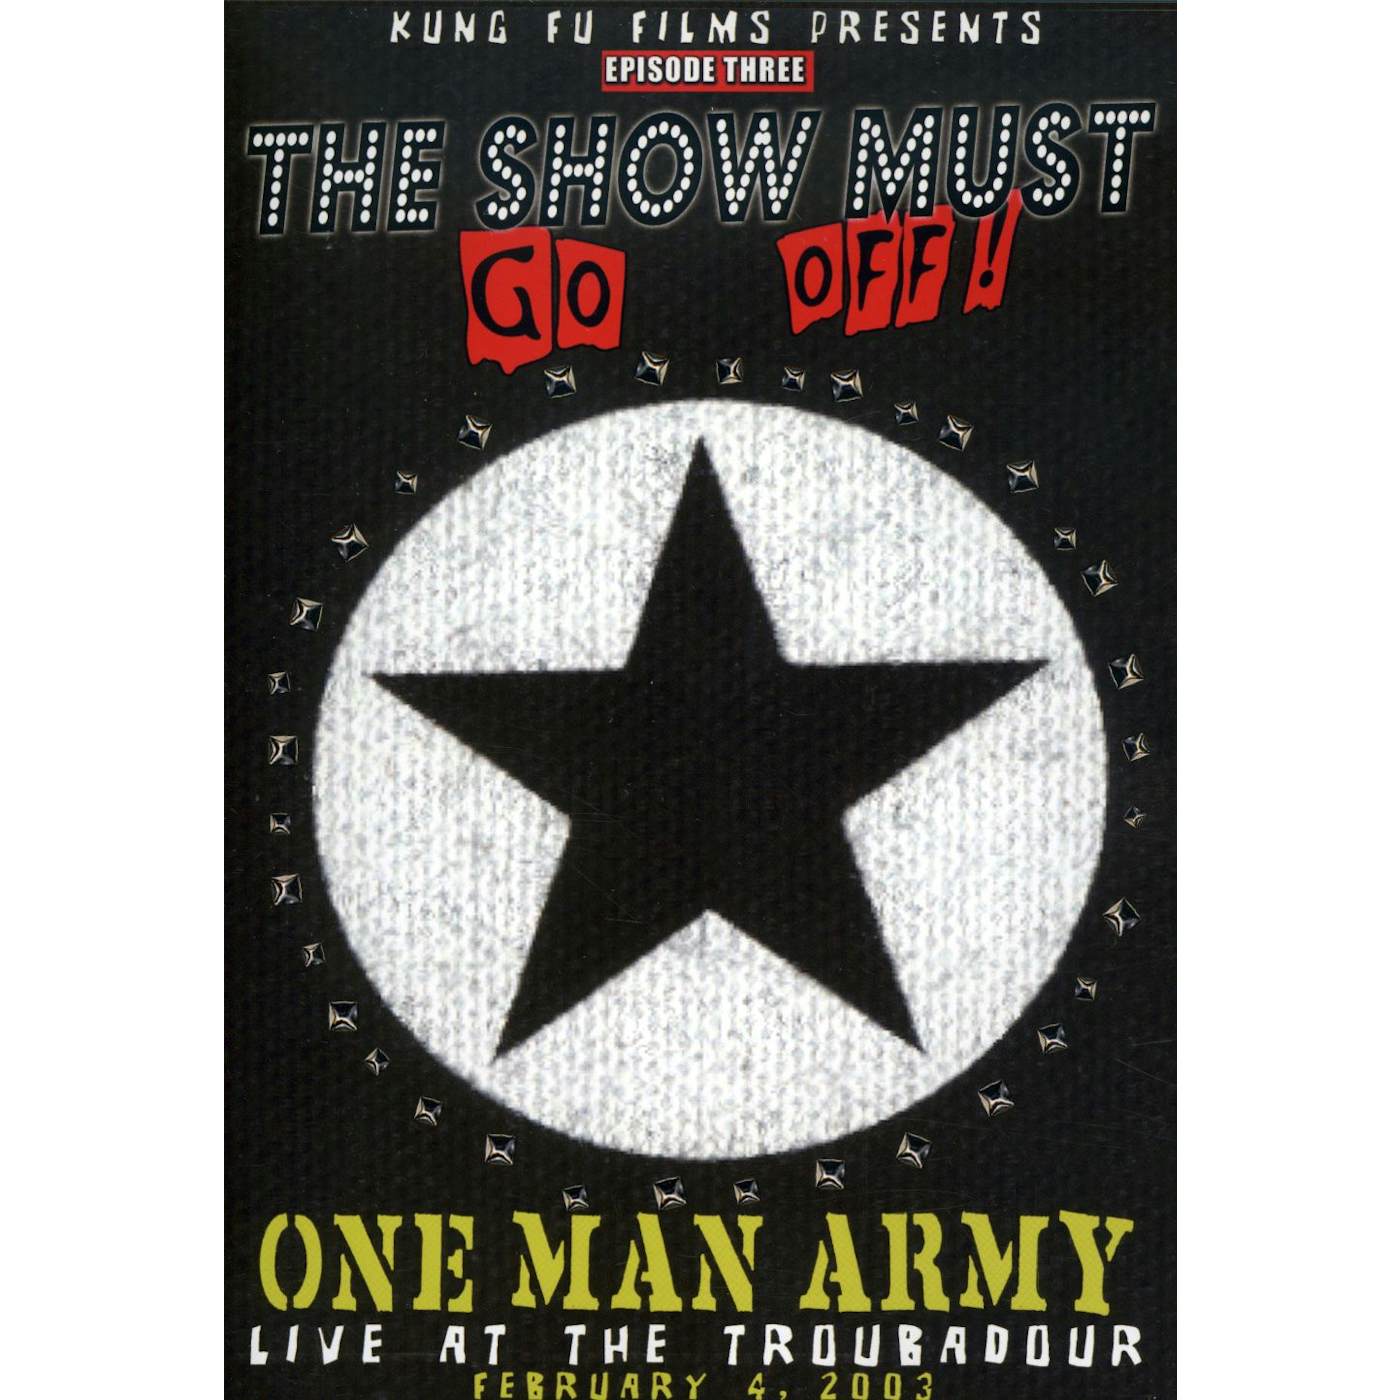 One Man Army LIVE AT THE TROUBADOUR DVD